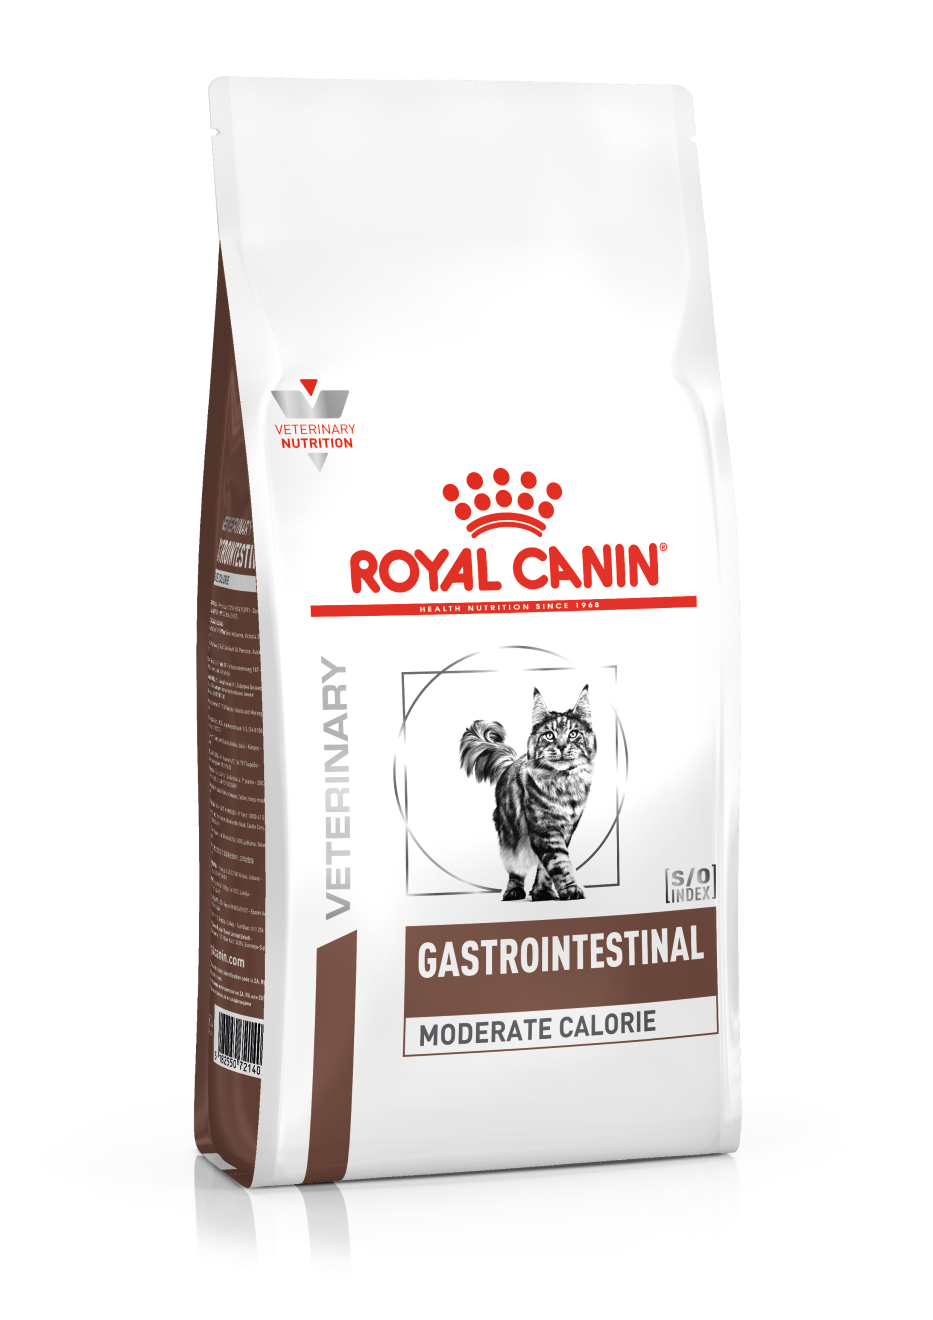 Royal Canin GastroIntestinal (Moderate Calorie) for Cats